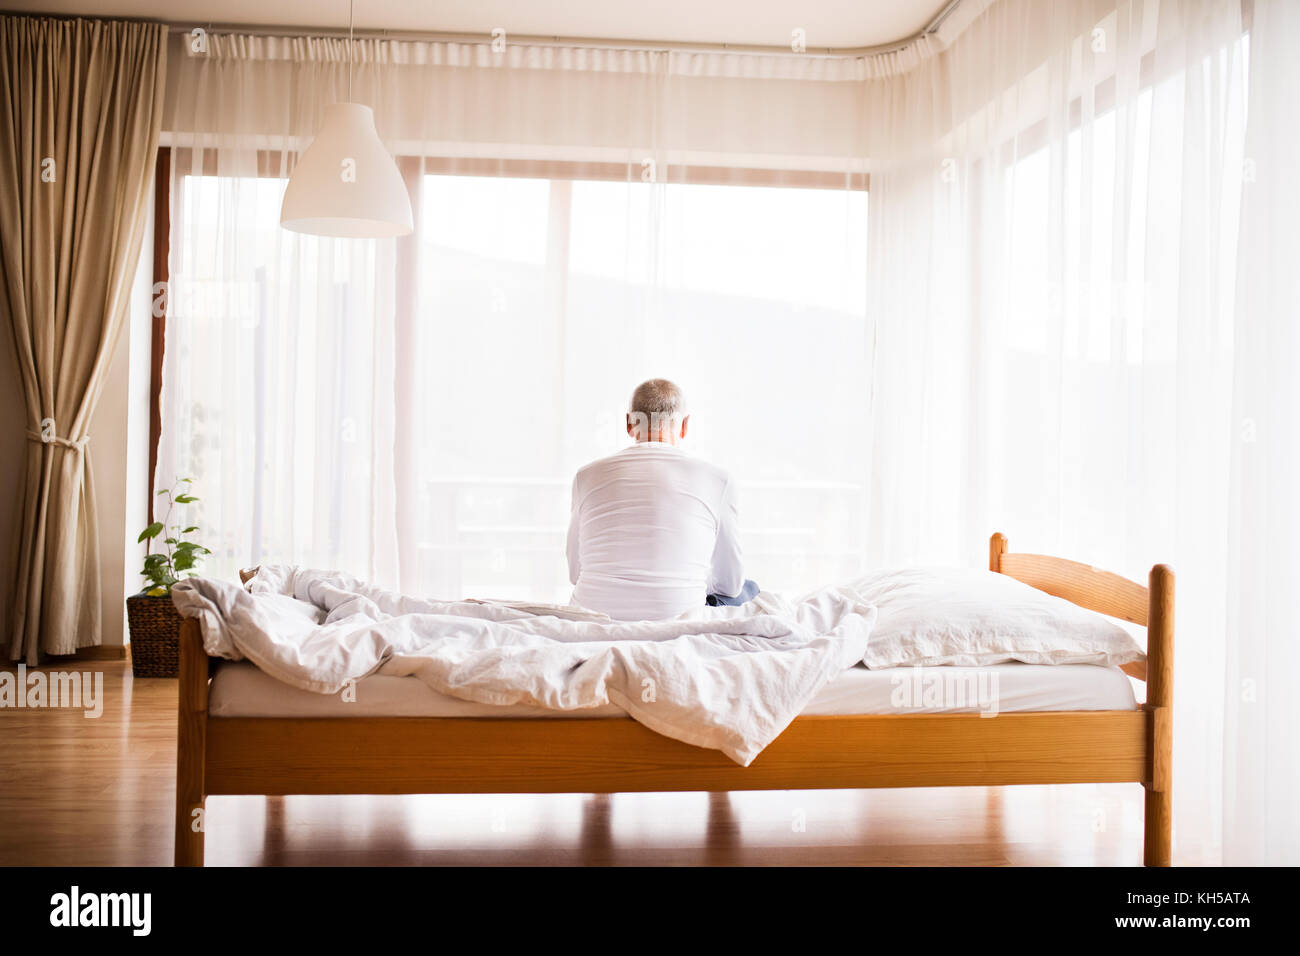 Senior man sitting on bed at home. Stock Photo